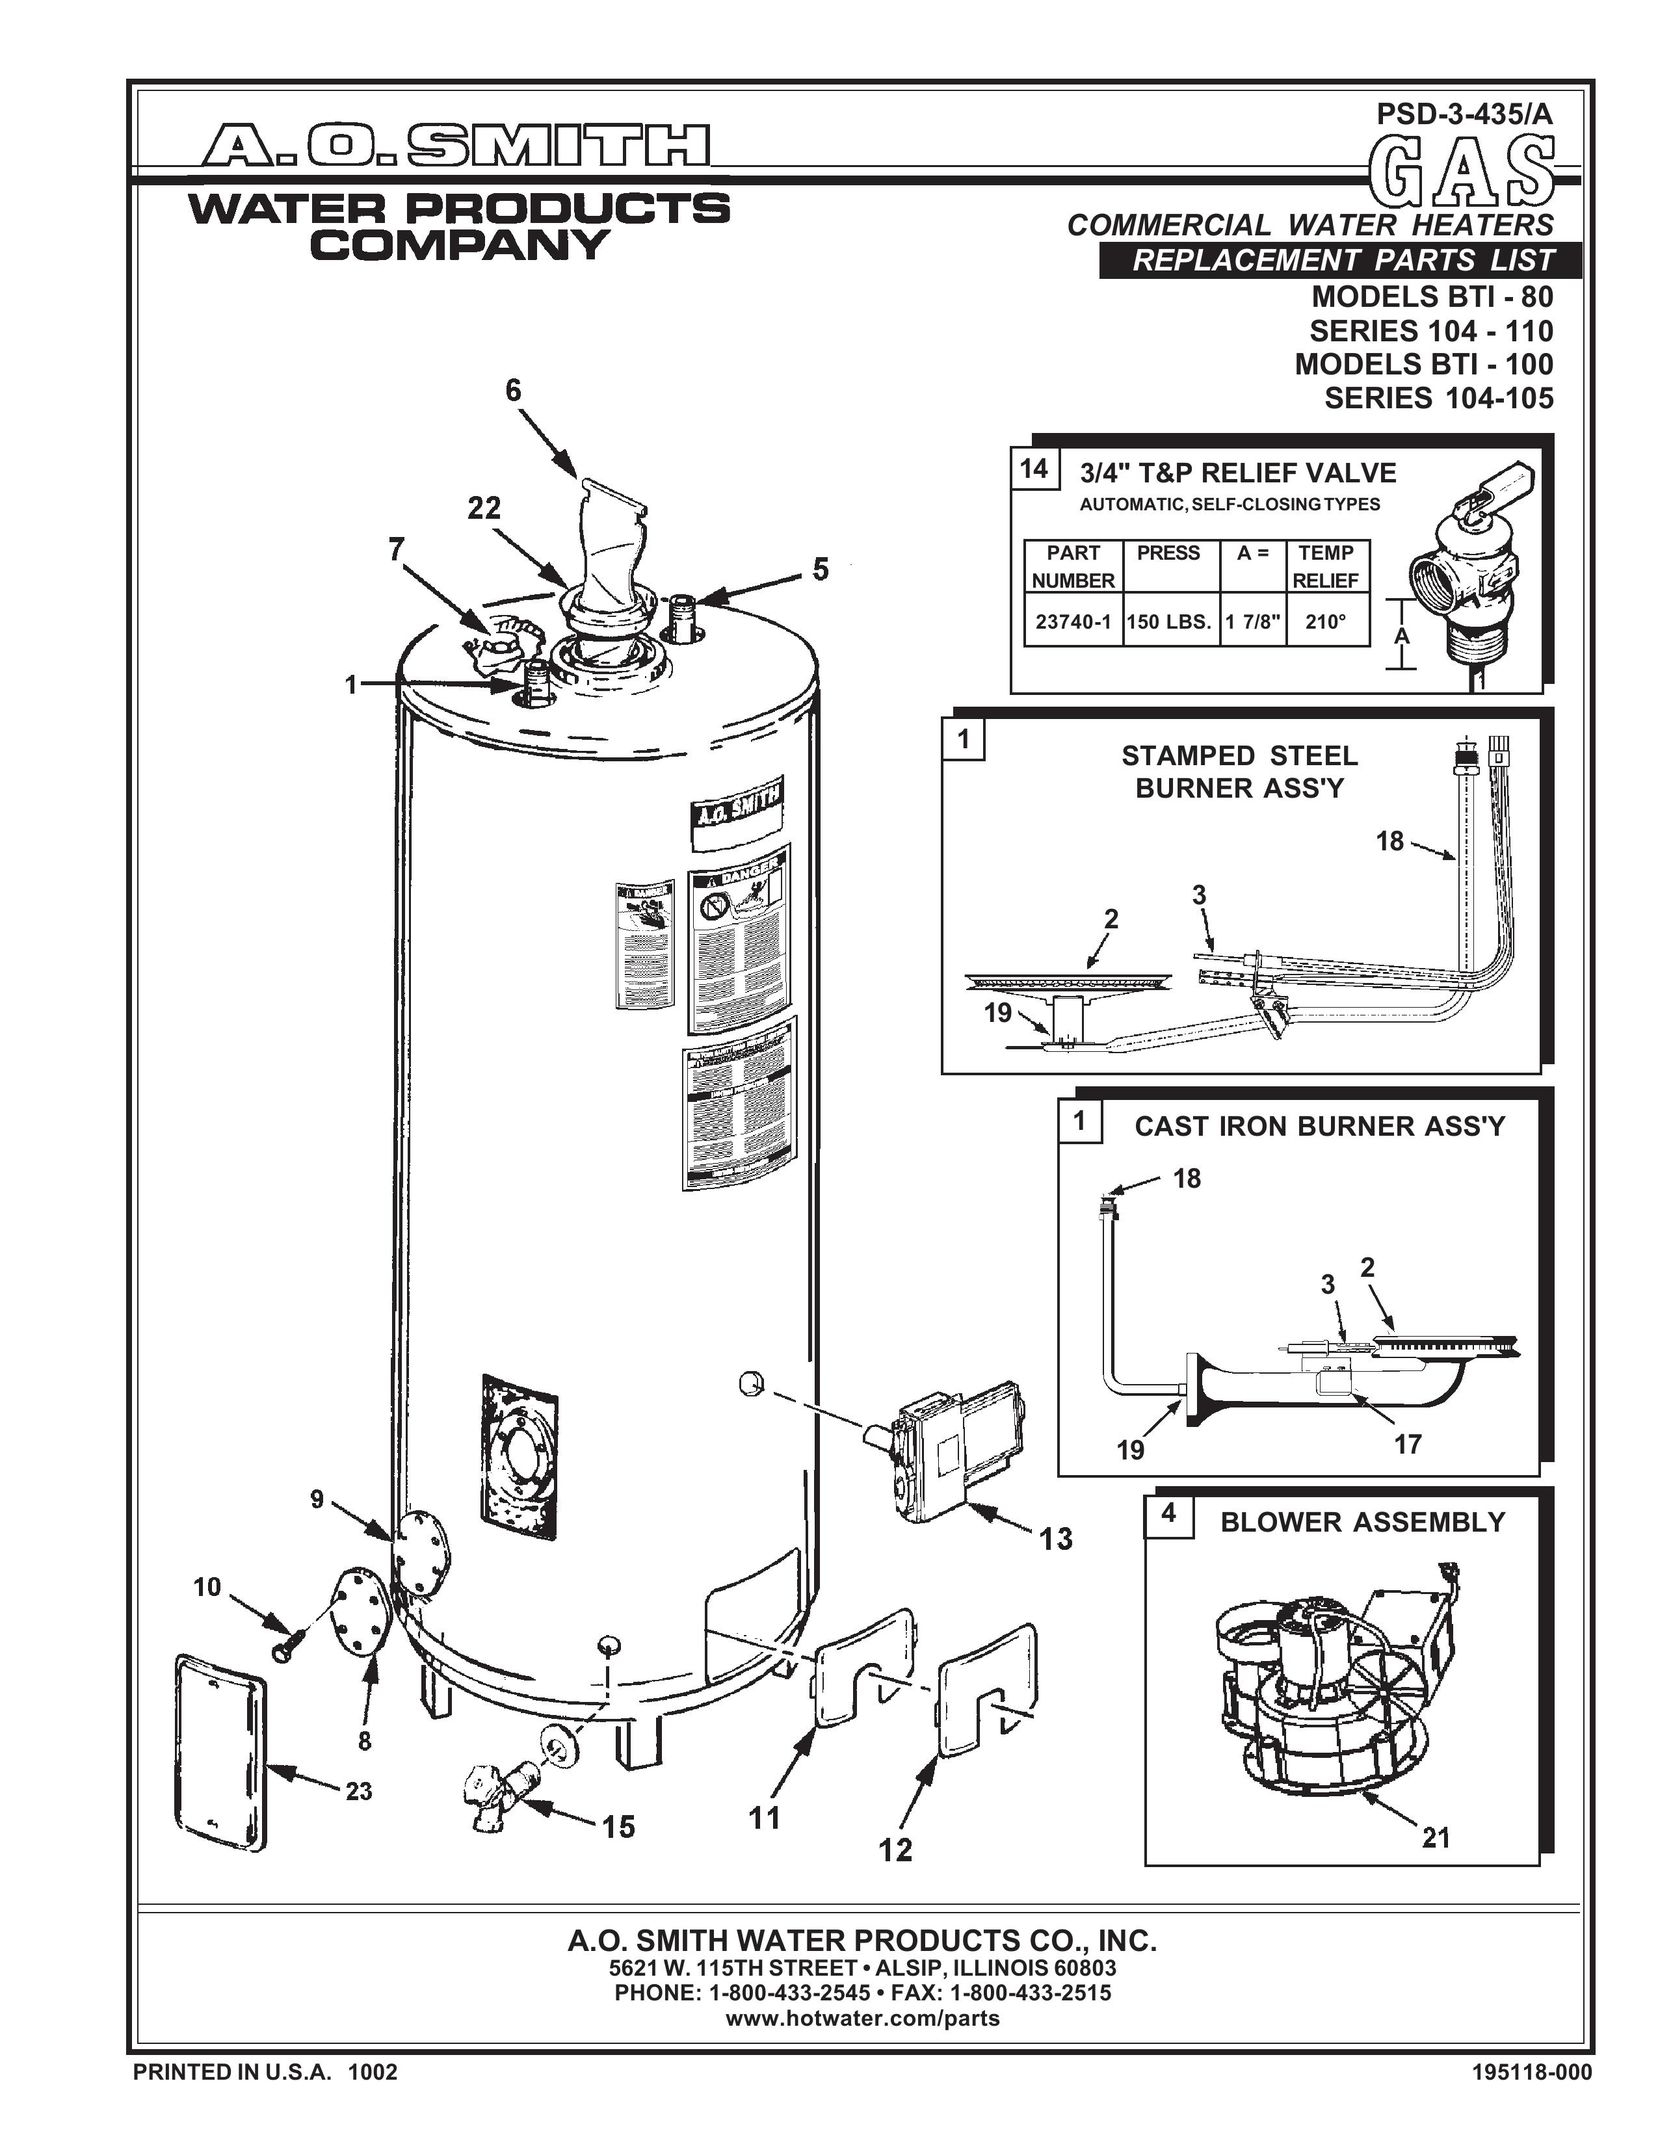 A.O. Smith 104-105 Water Heater User Manual